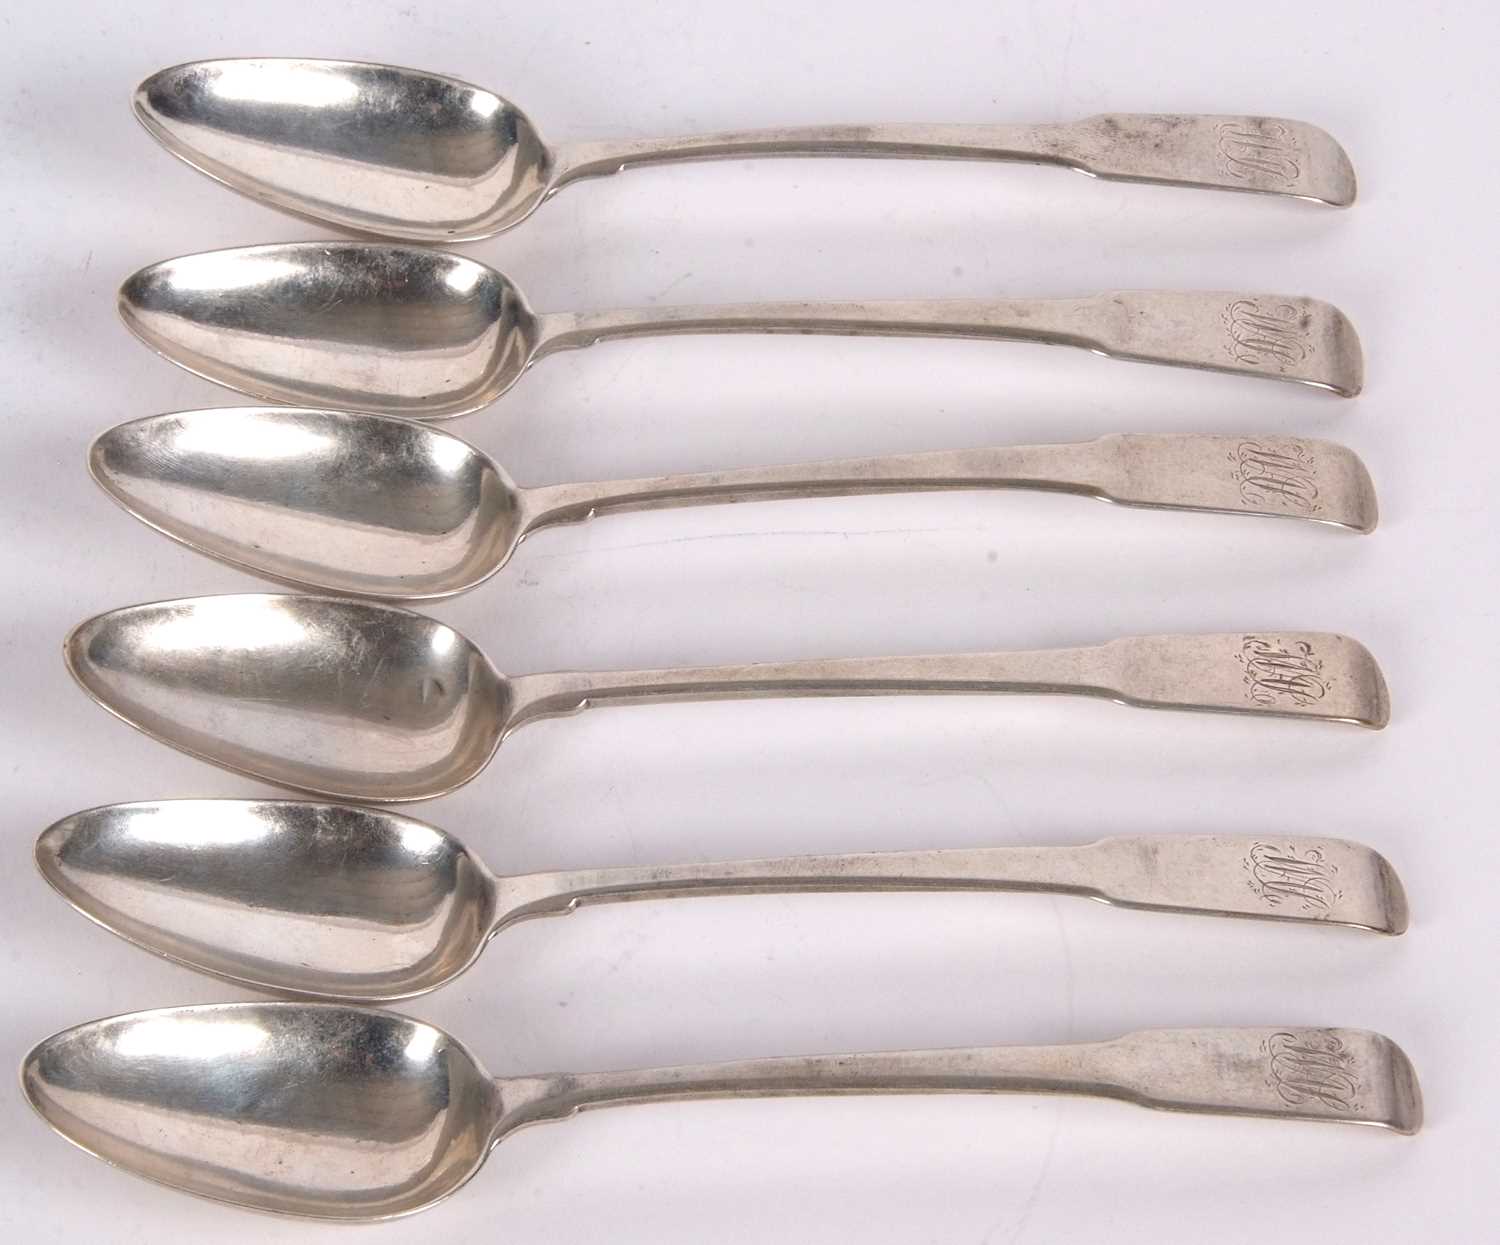 Six Scottish Provincial silver tablespoons, fiddle pattern, paisley, circa 1810, makers mark for